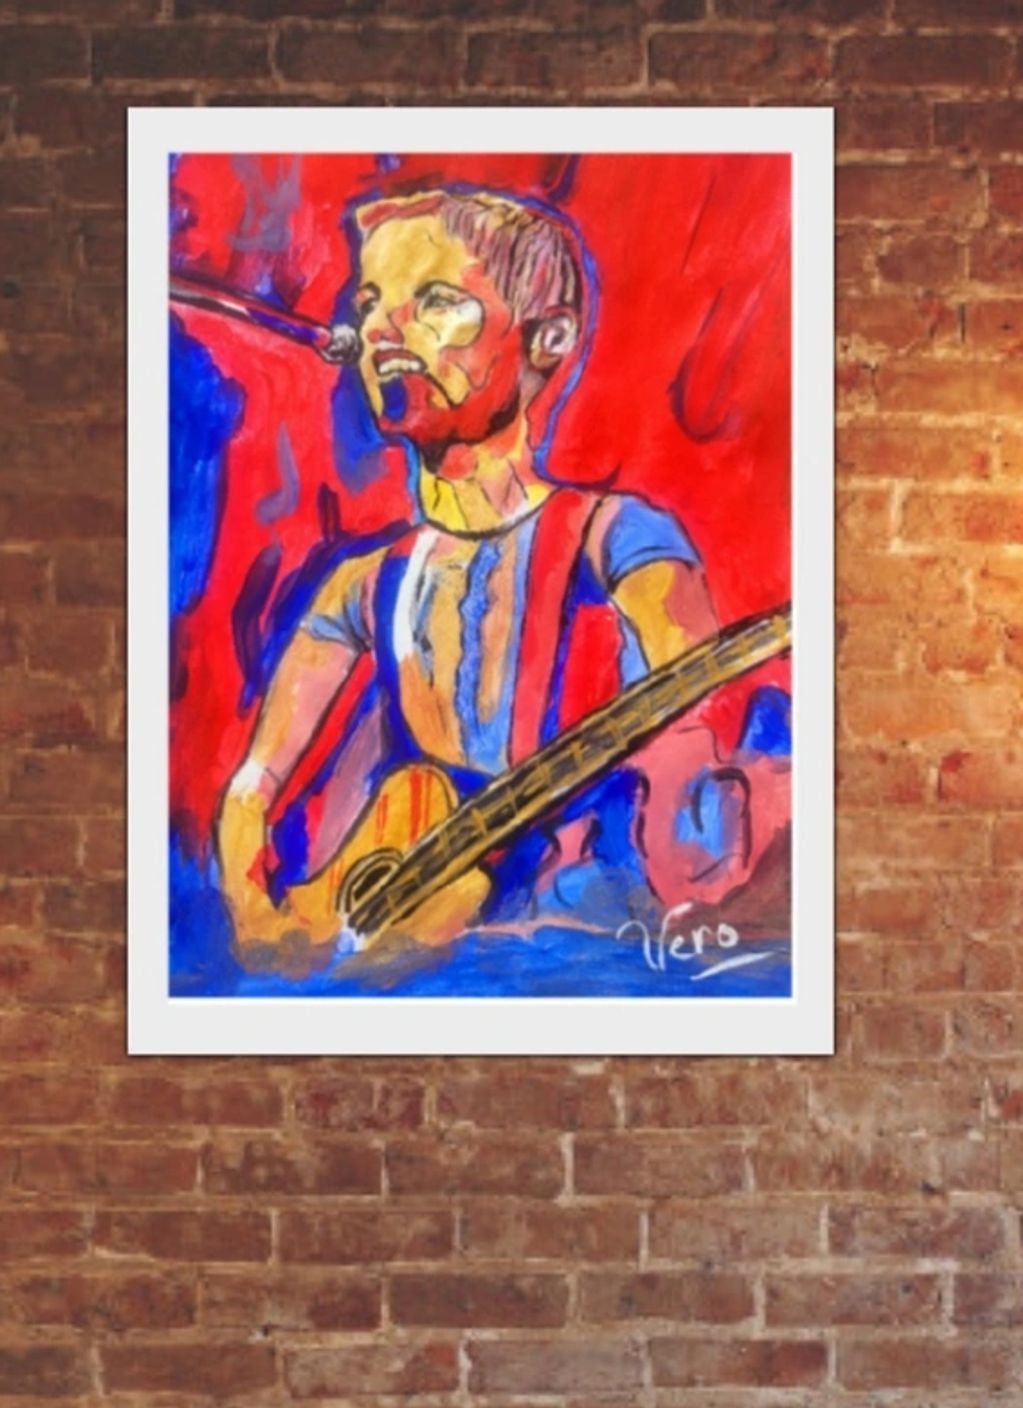 A colourful abstract version of the late GREAT Dolores O'Riordan 🎨🎤🎵 